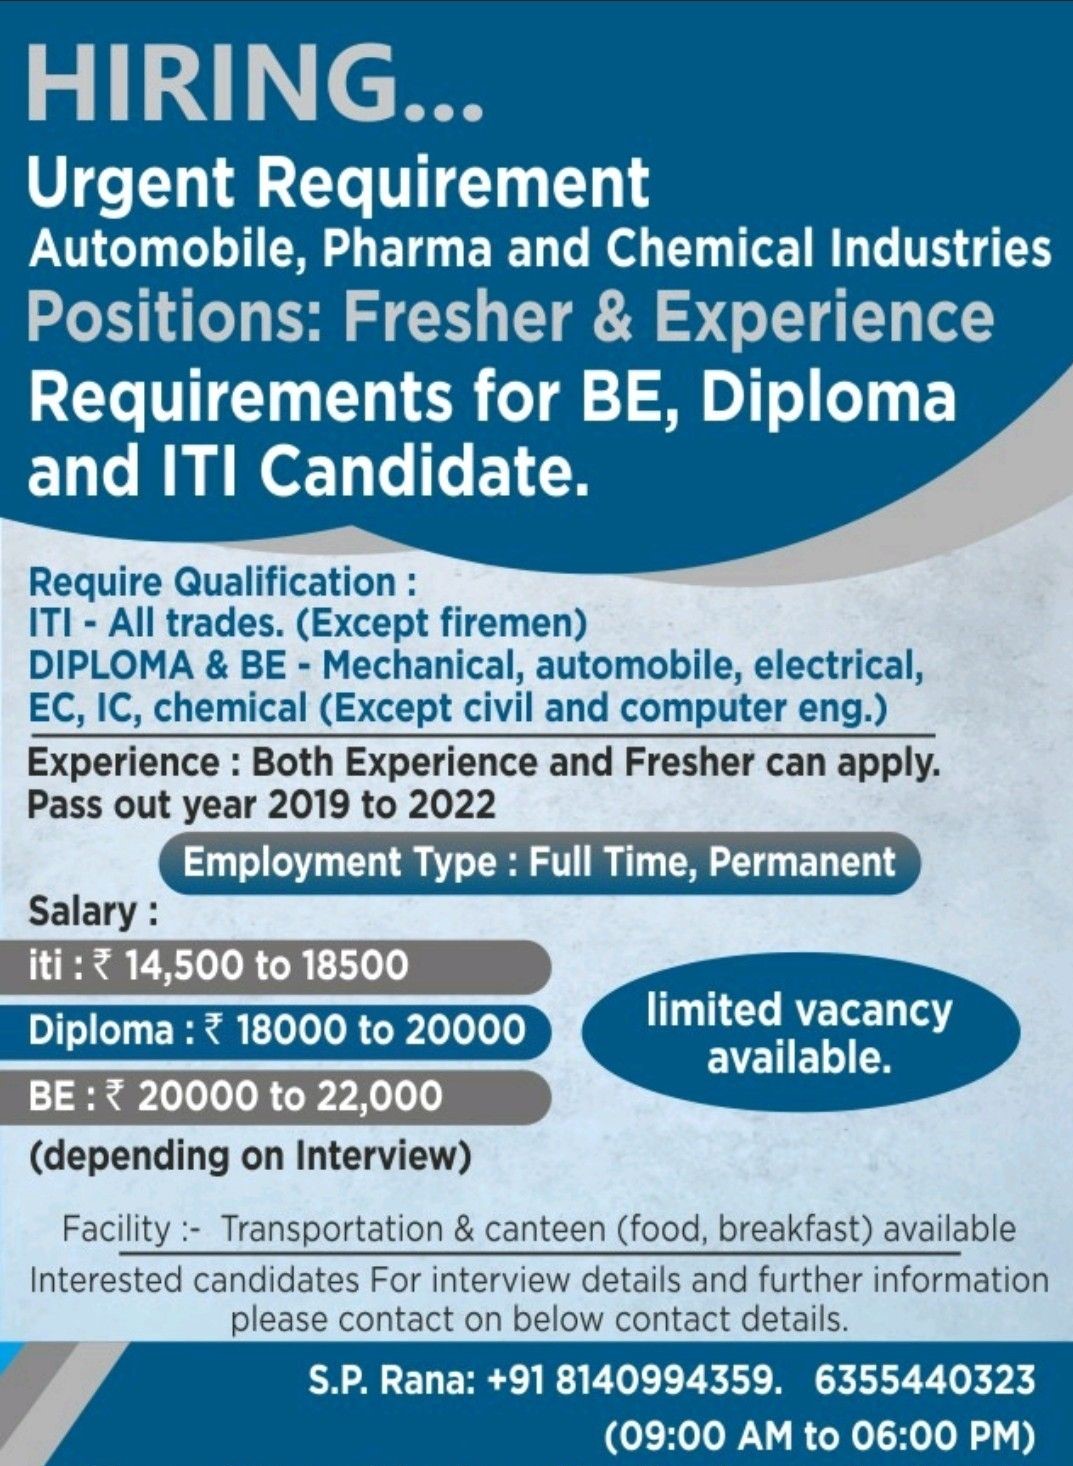 Requirements for BE, Diploma, and ITI Candidates in Automobile, Pharma, and Chemical Industries